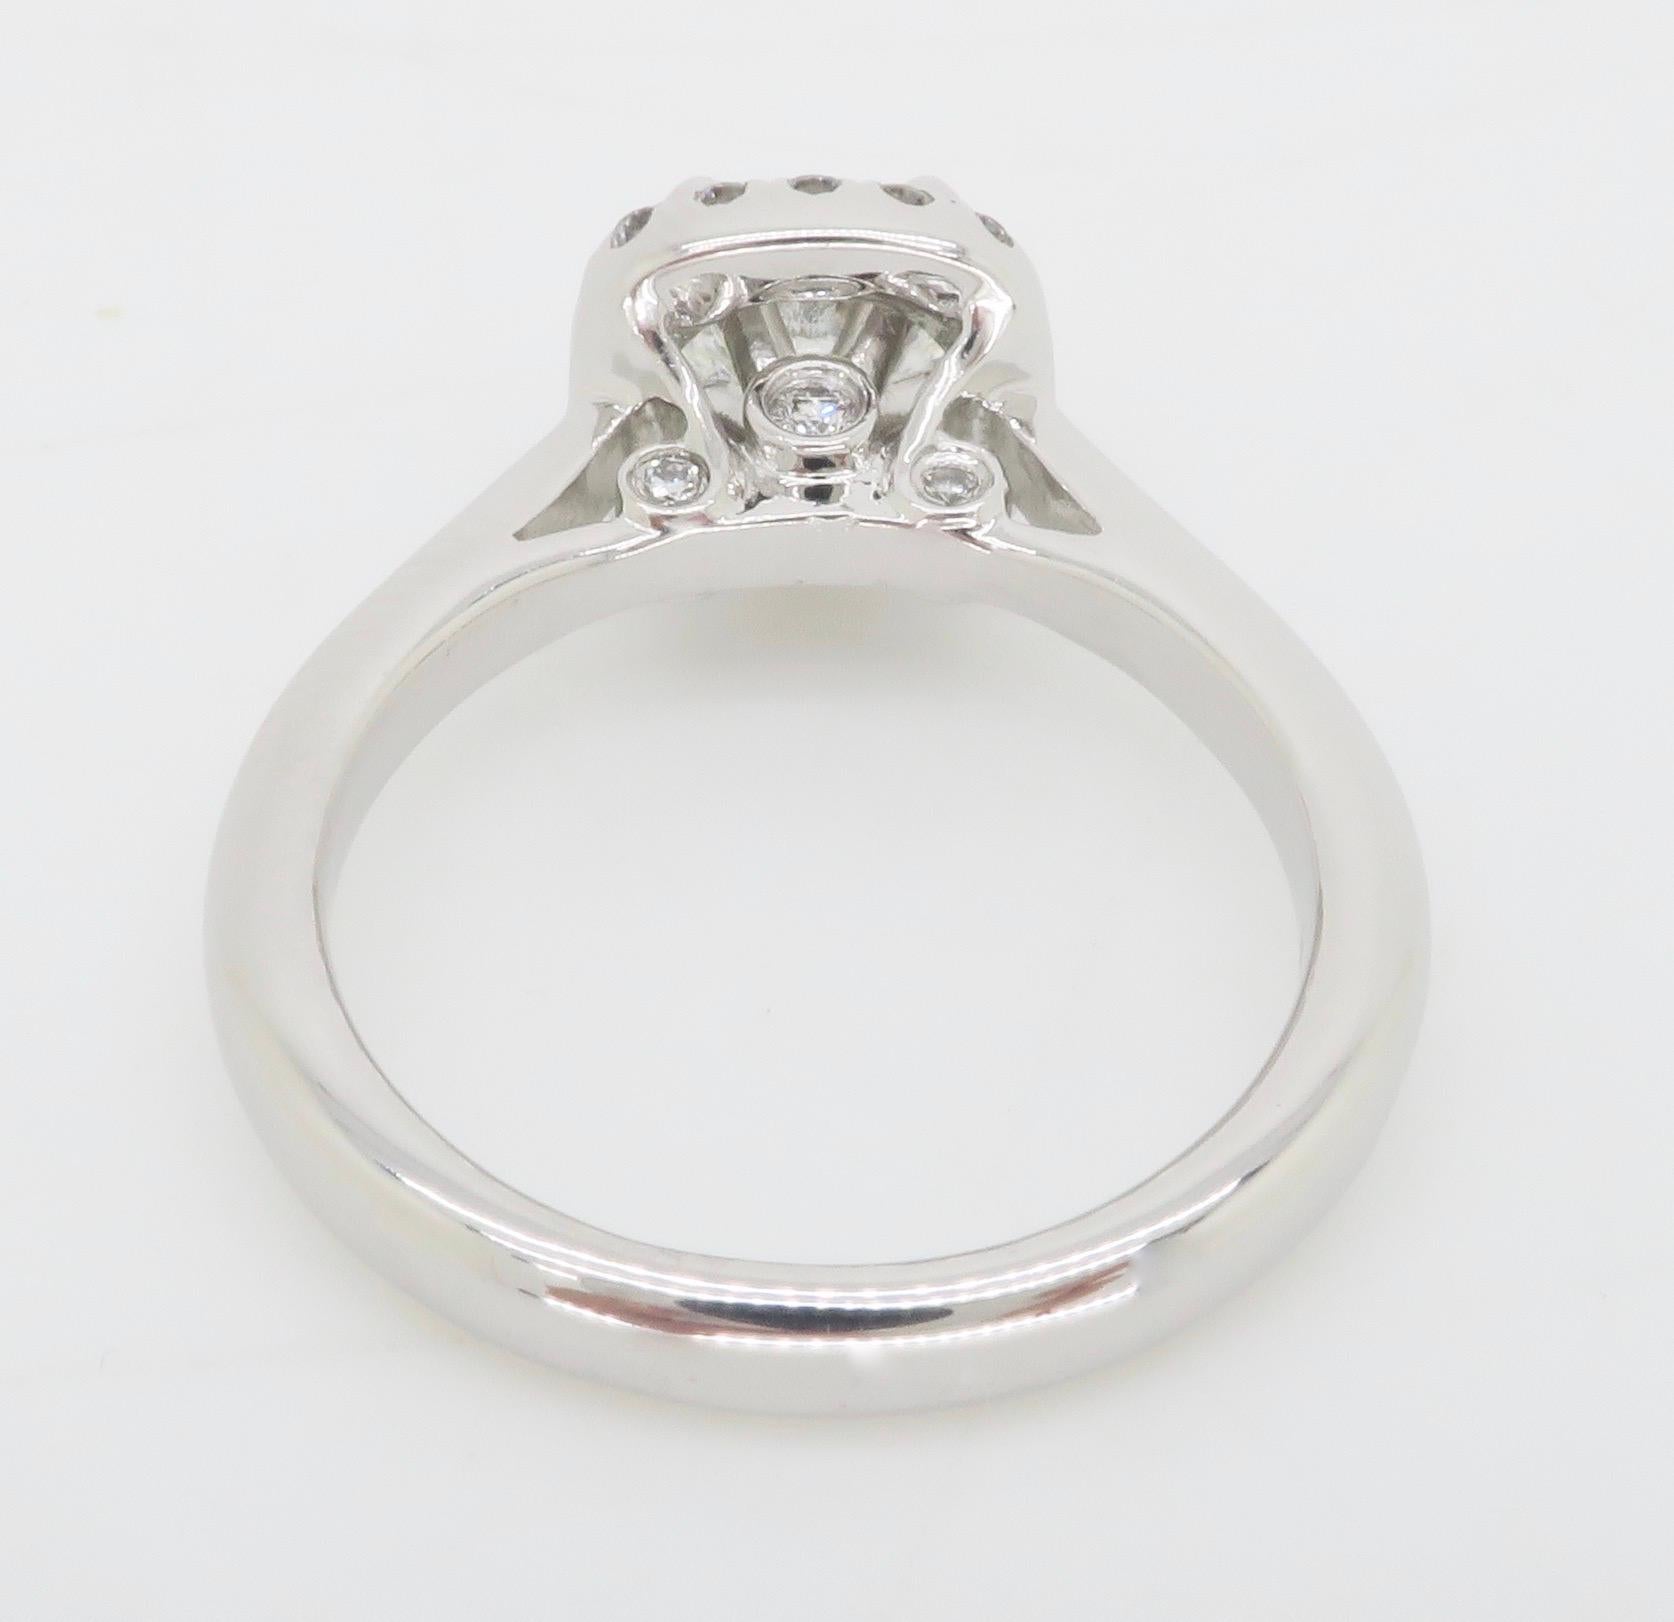 GIA Certified Round Brilliant Cut Diamond in a Stunning Scott Kay Halo Setting  For Sale 10